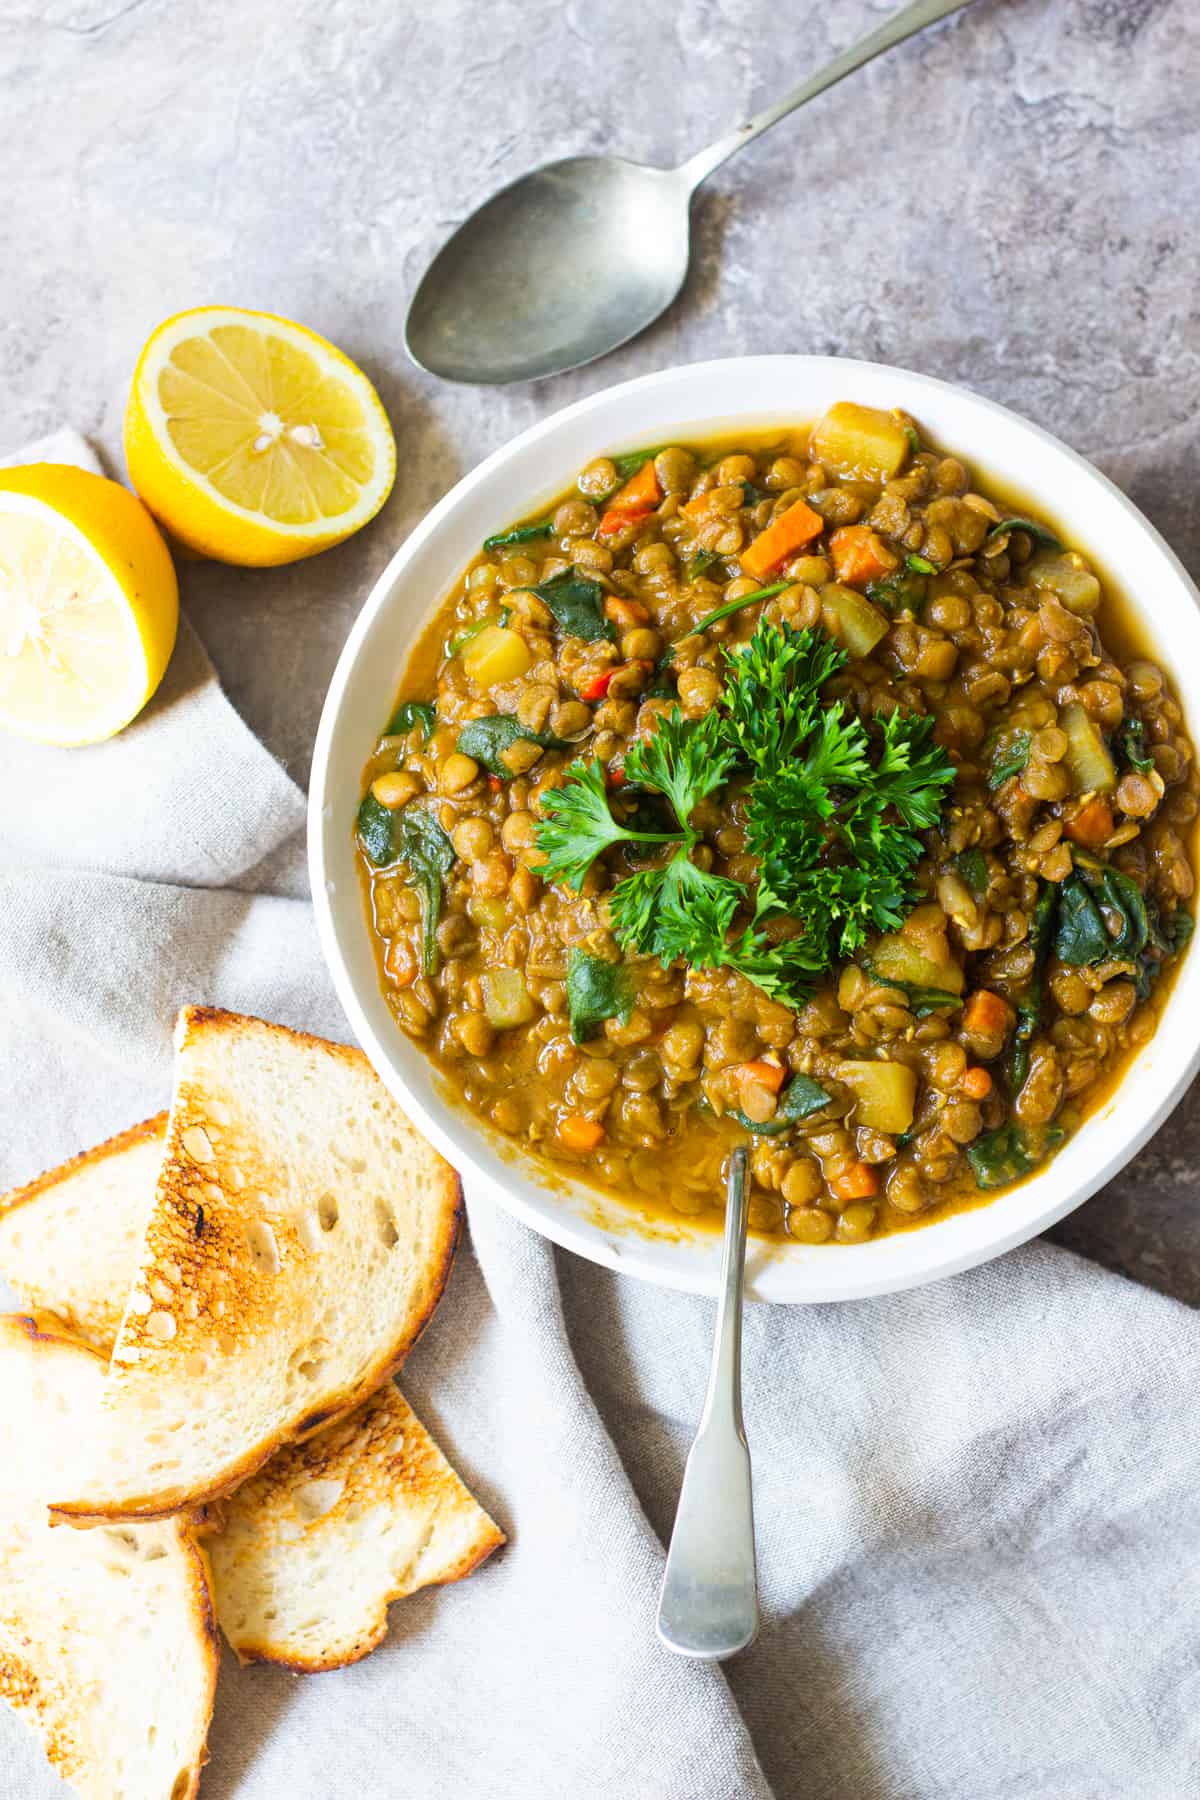 You can also make lentil soup recipe in a slow cooker